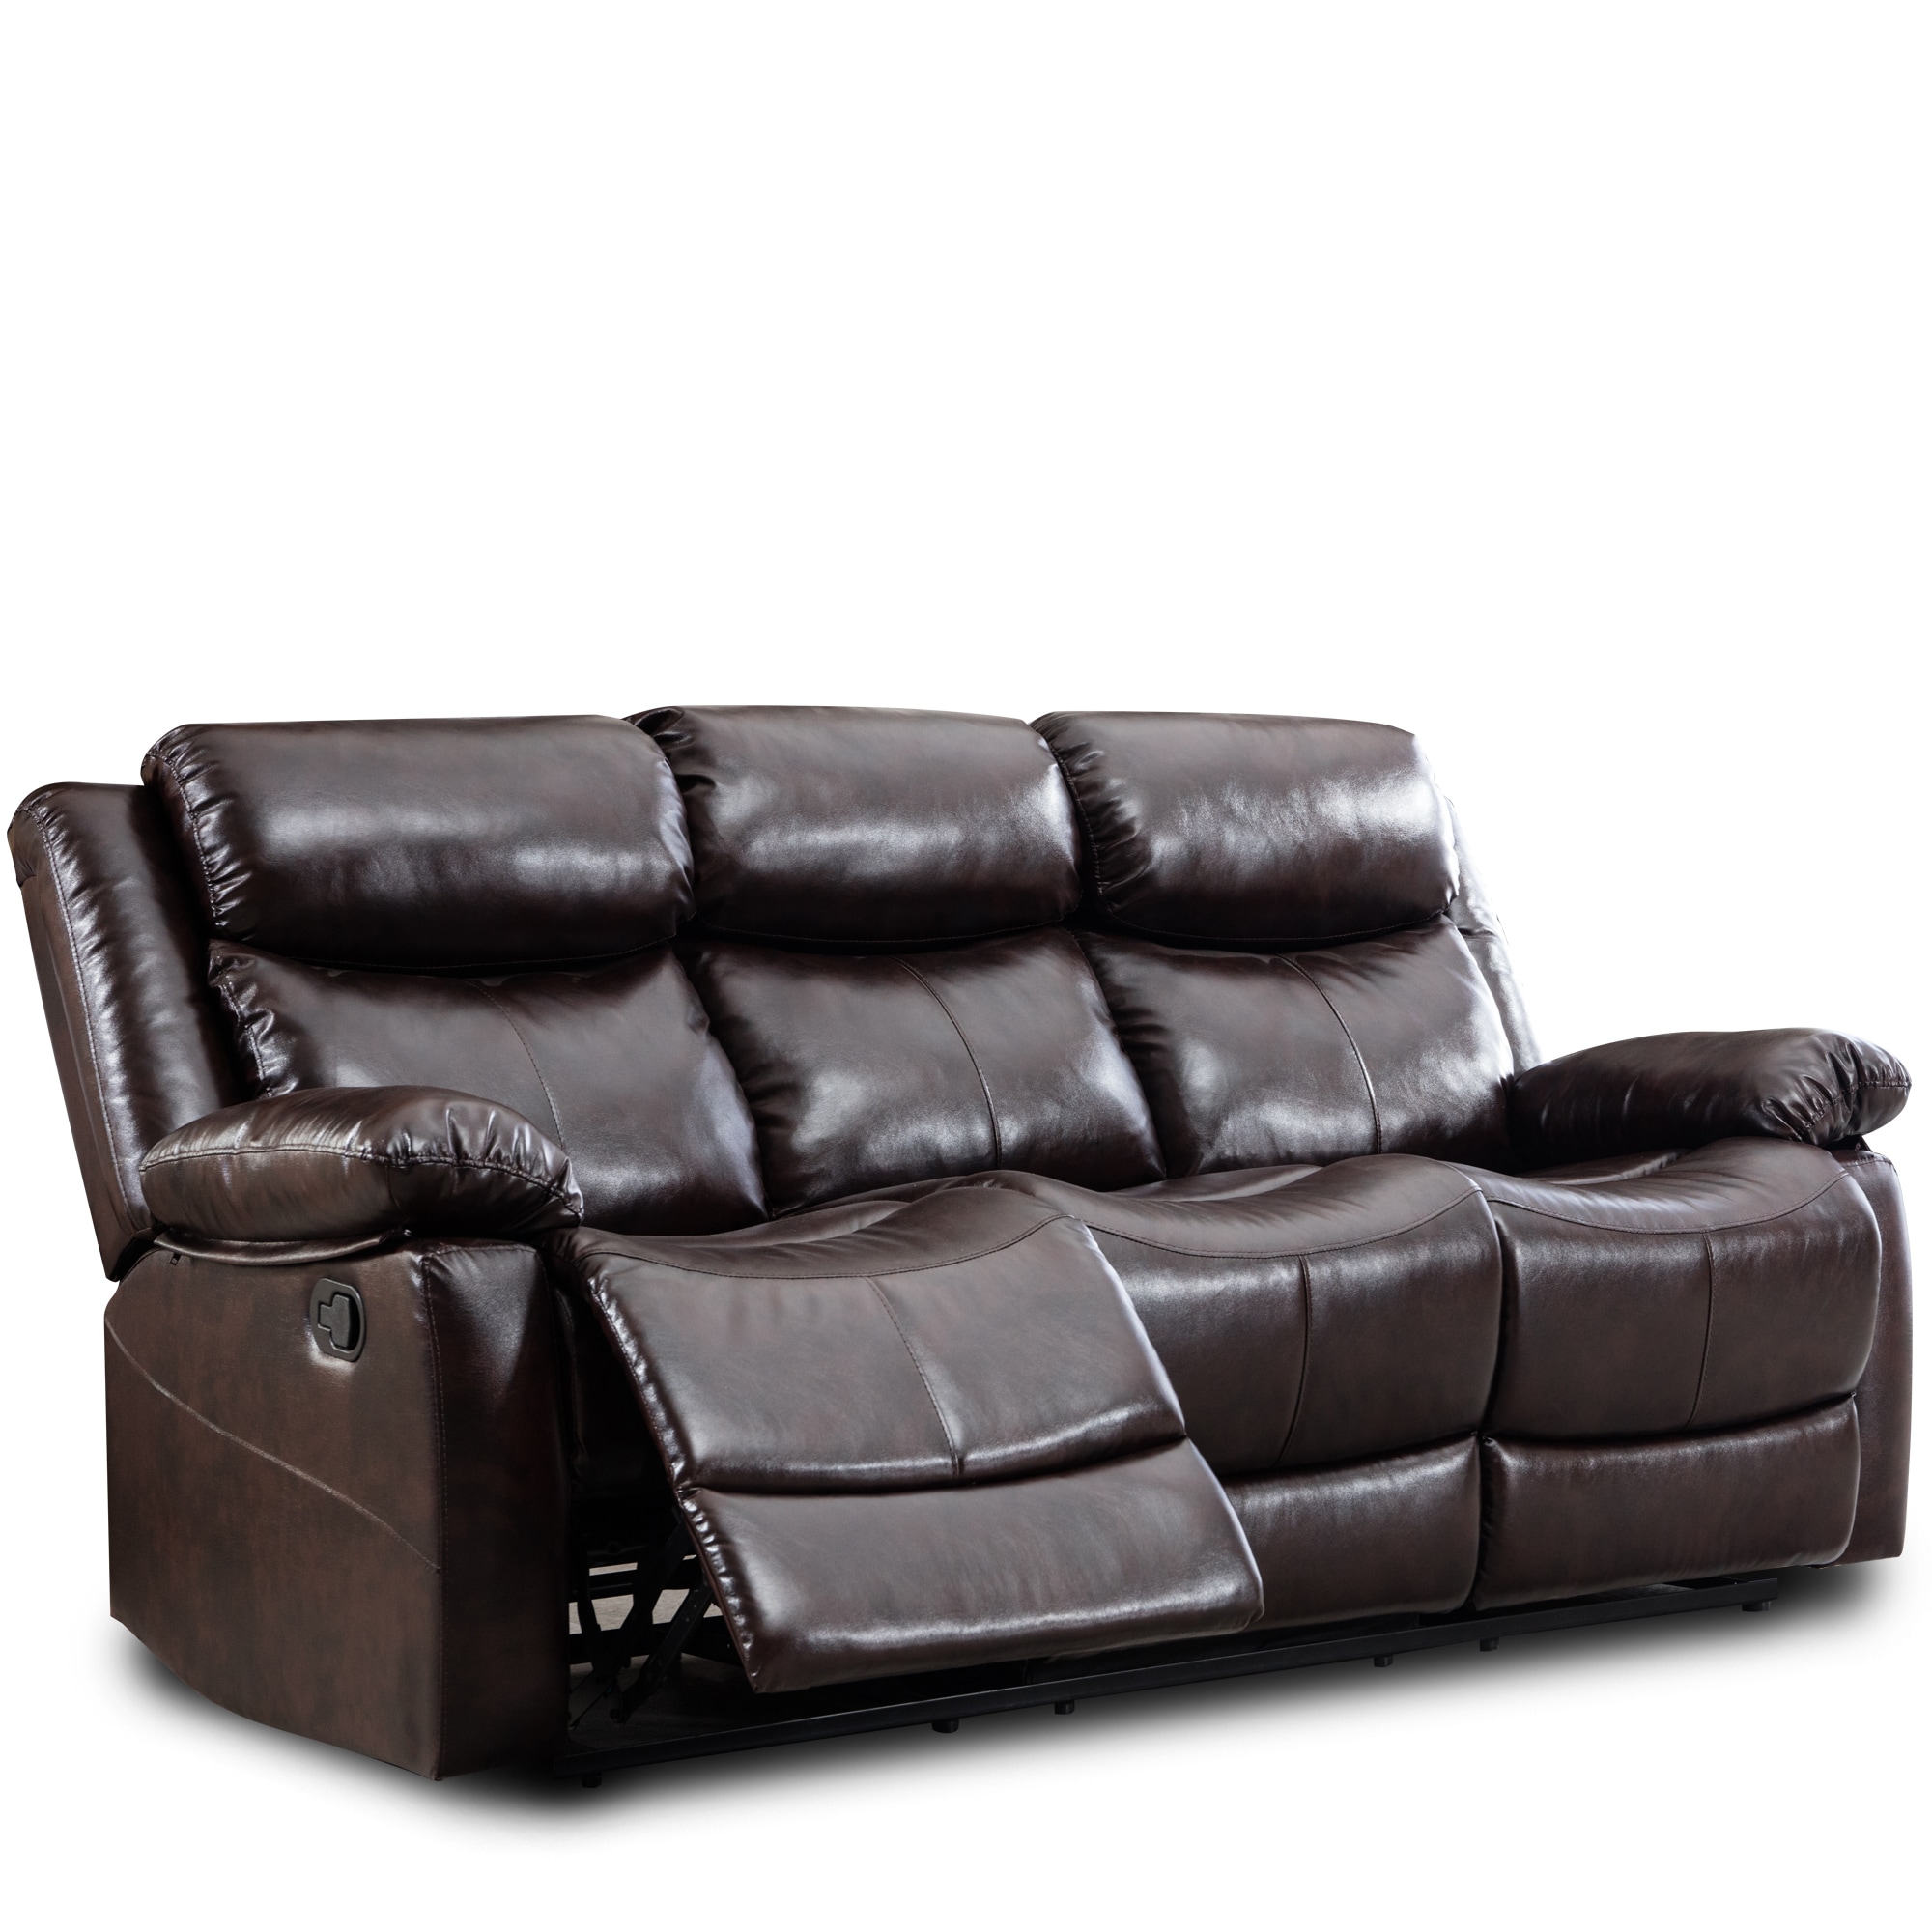 Casainc Brown Pu Leather Sectional, Leather Couch Loveseat Recliner Set